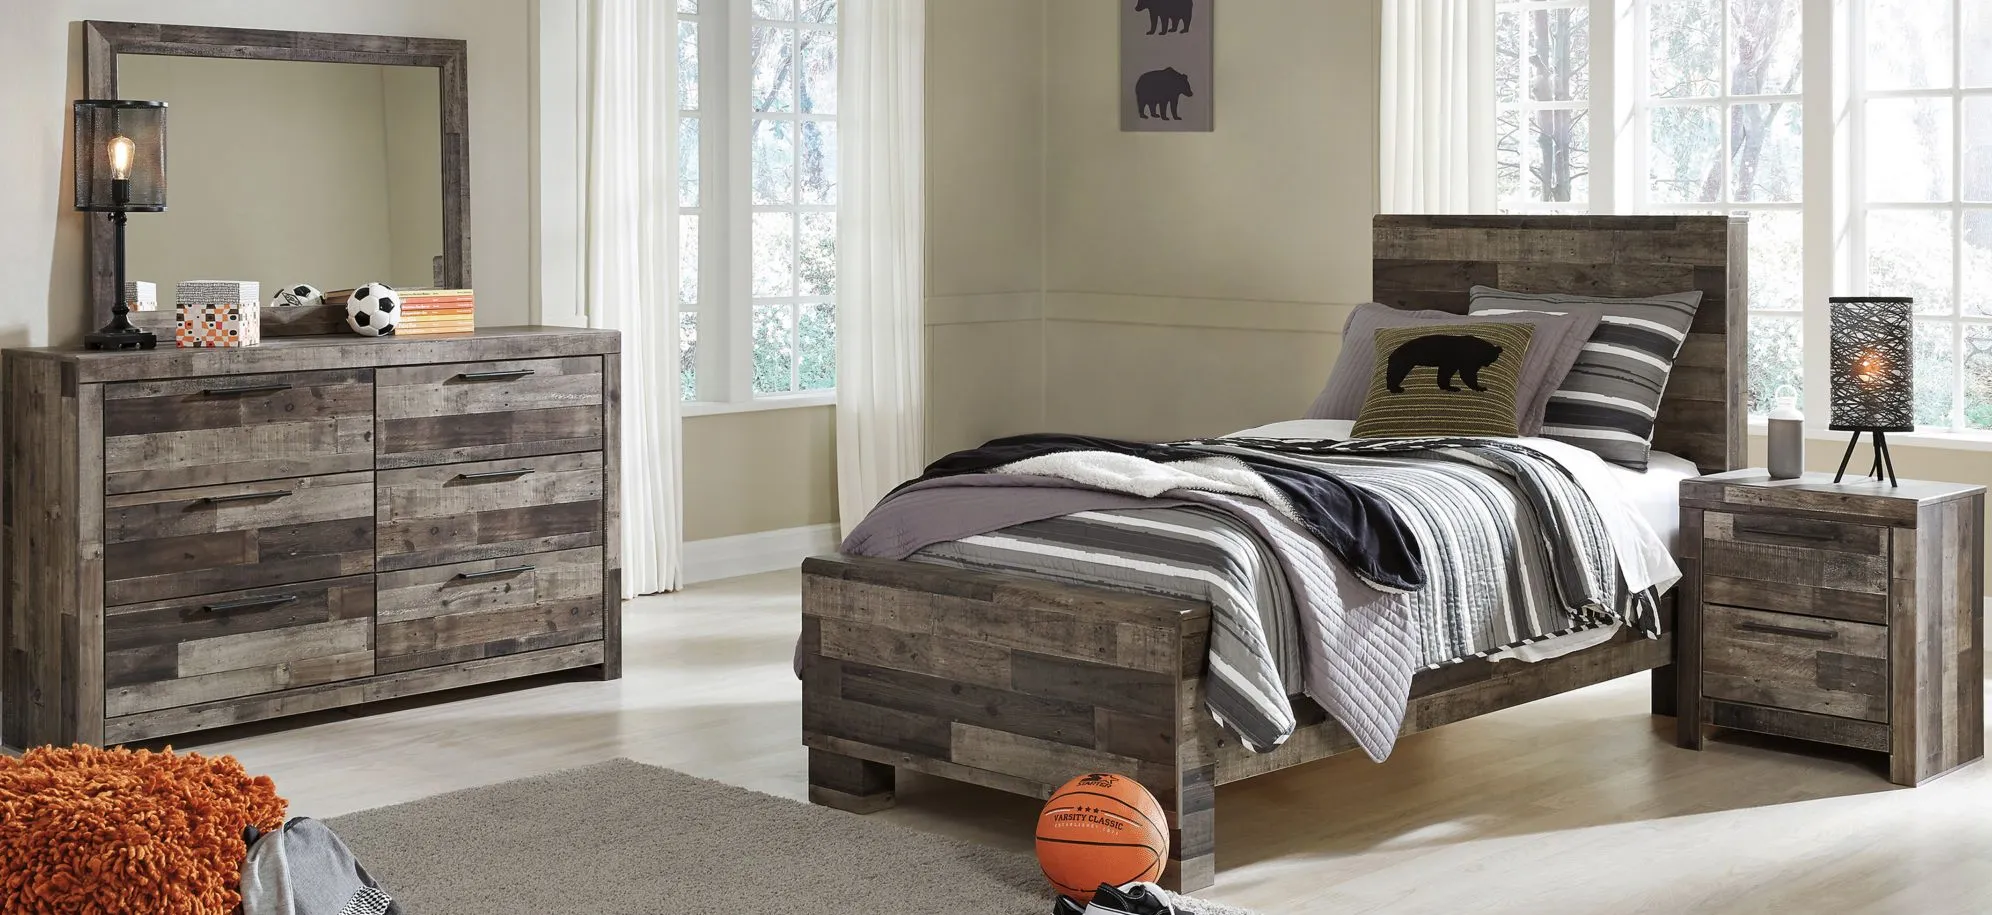 Ainsworth 4-pc. Bedroom Set in Brown by Ashley Furniture